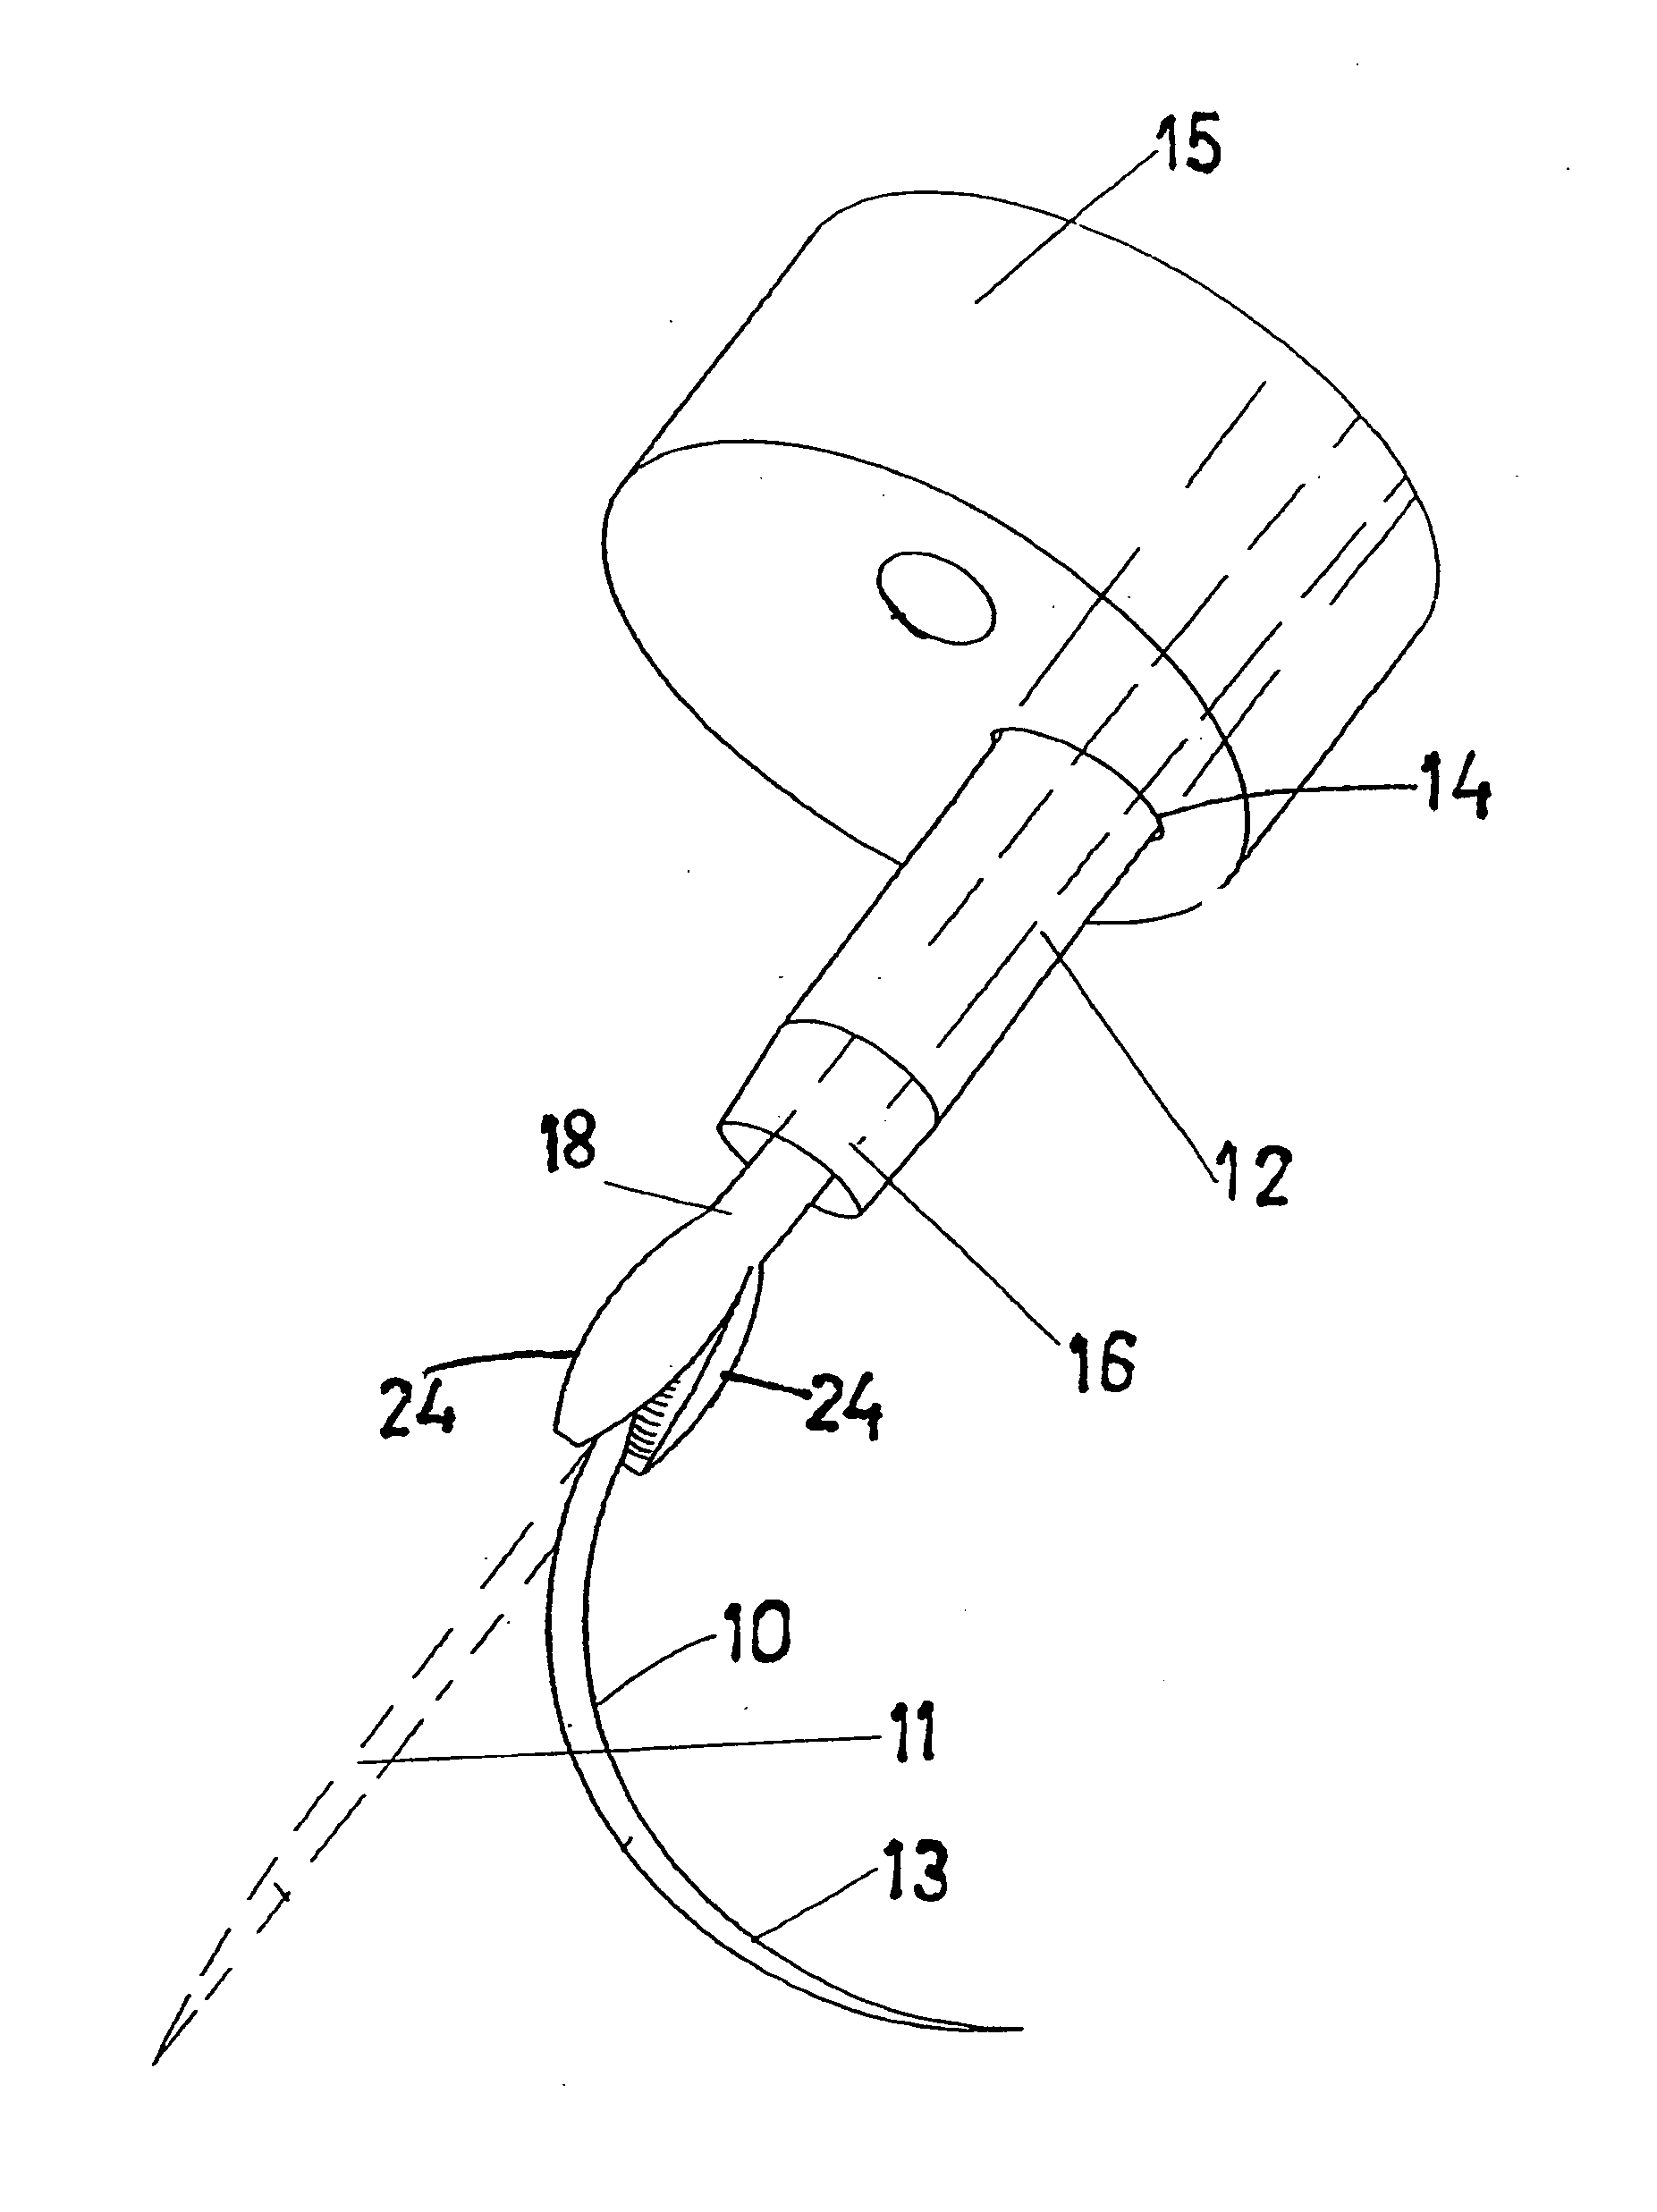 Endoscopic suturing assembly and associated methodology using a temperature biased suture needle